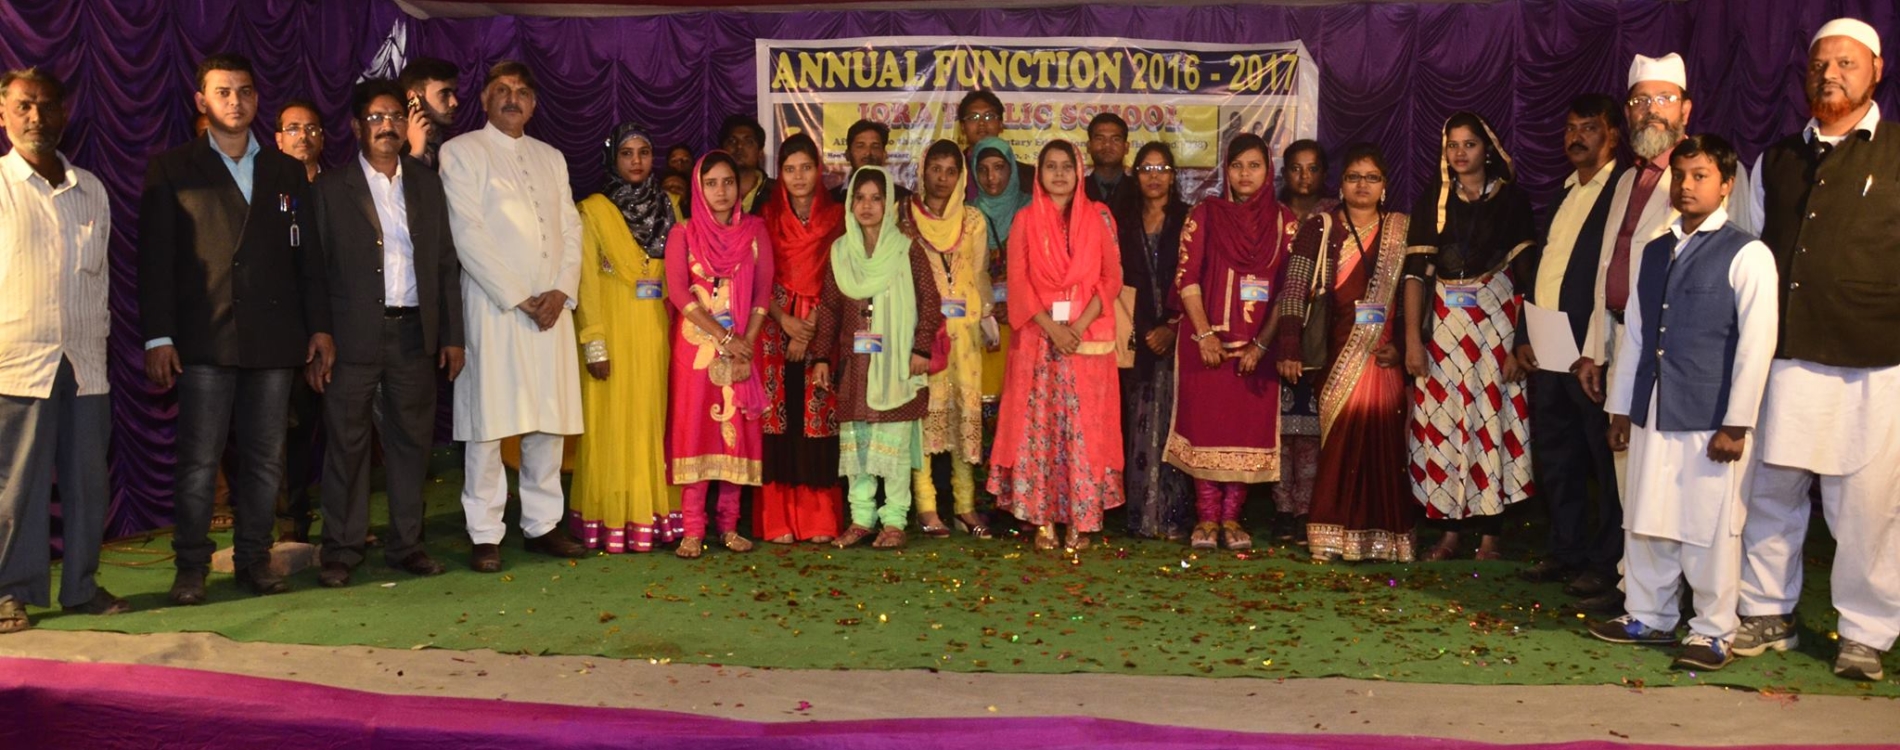 annual_function